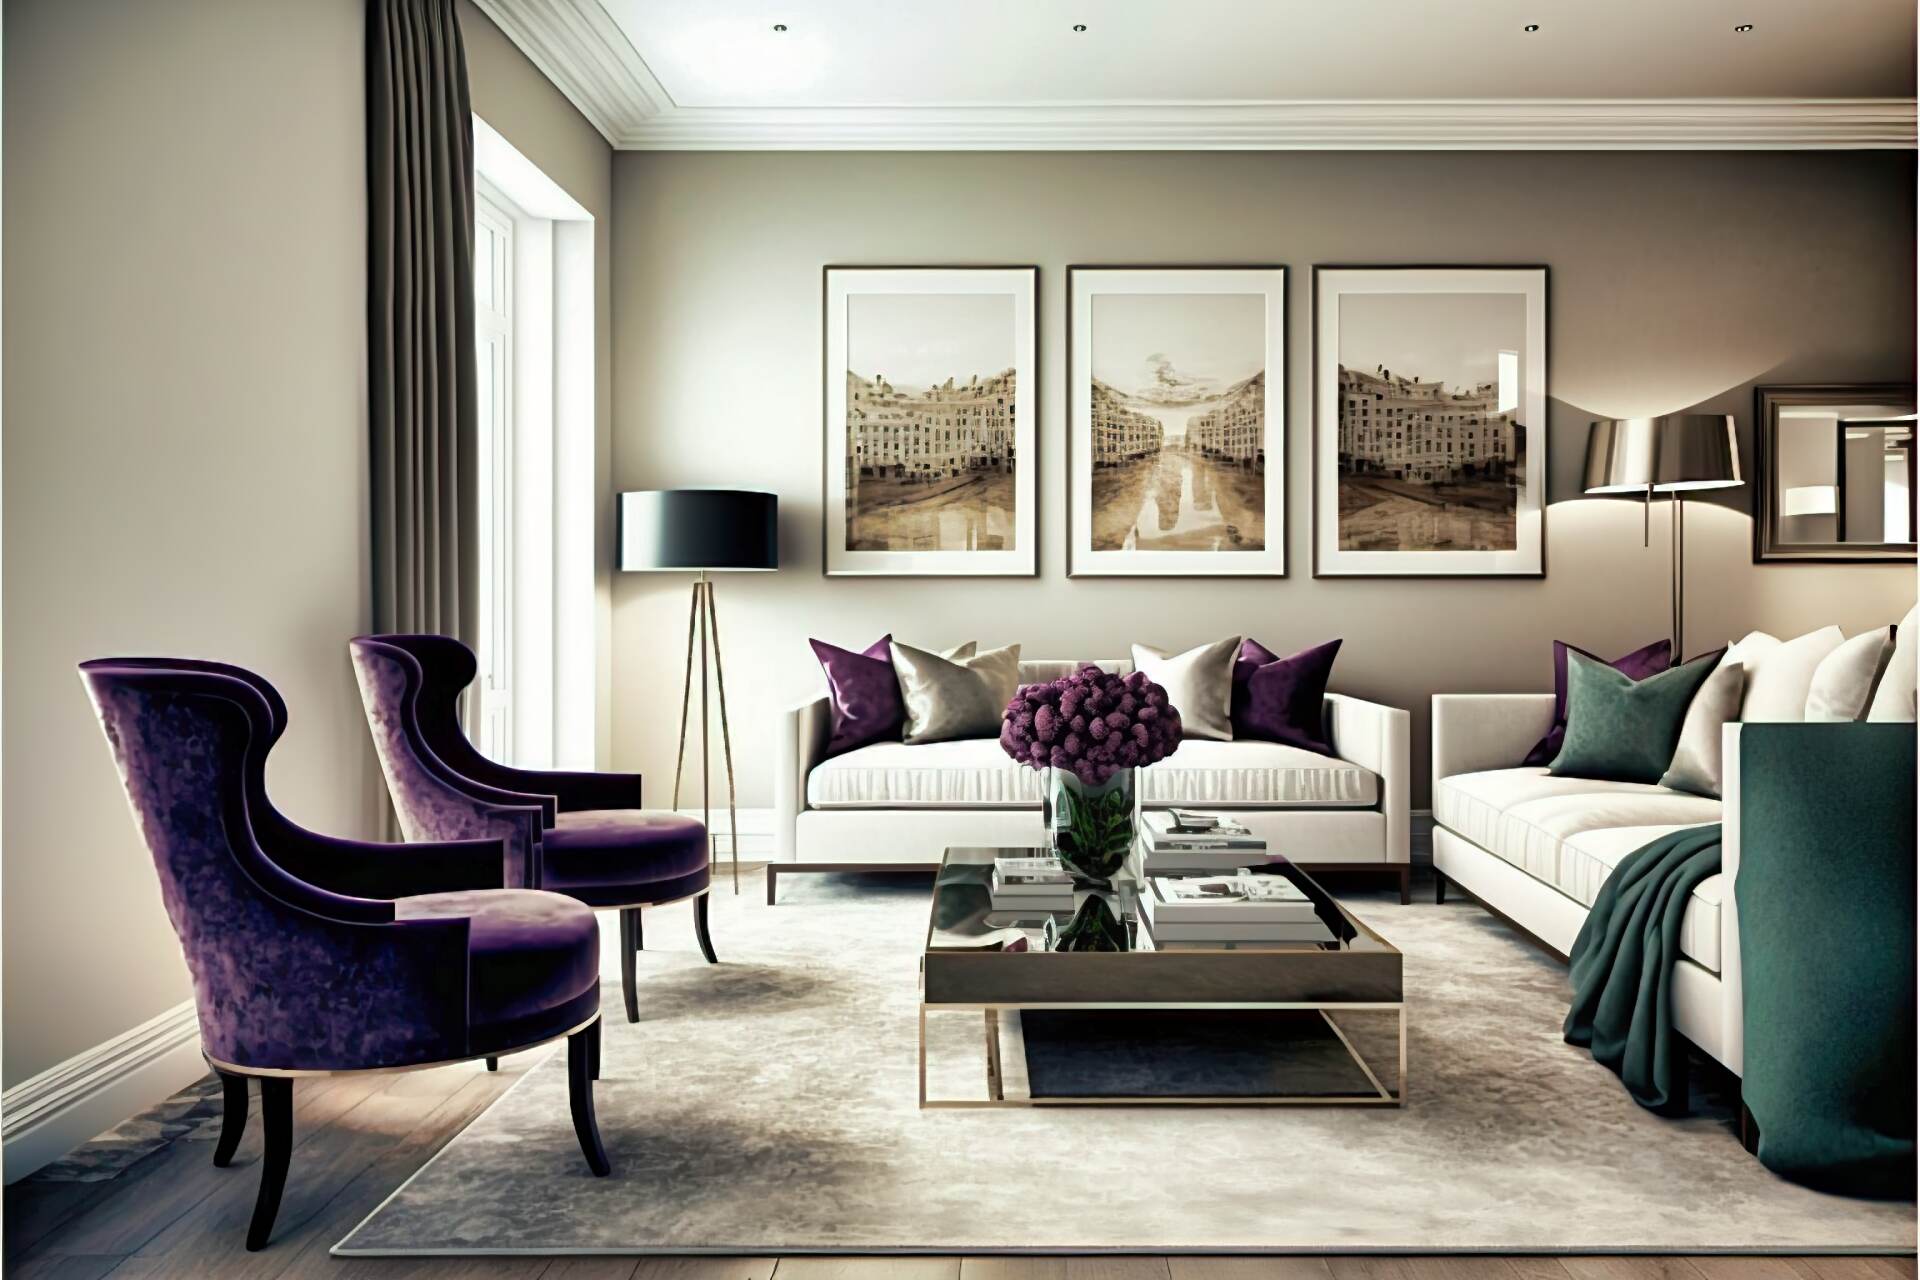 This Elegant Modern Living Room Features A Simple And Sophisticated Color Palette. A Plush Velvet Sofa And An Armchair Provide Comfortable Seating, While A Sleek Coffee Table And A Modern Rug Complete The Look. A Few Interesting Art Pieces And A Large Wall Mirror Add An Elegant Touch To The Room.